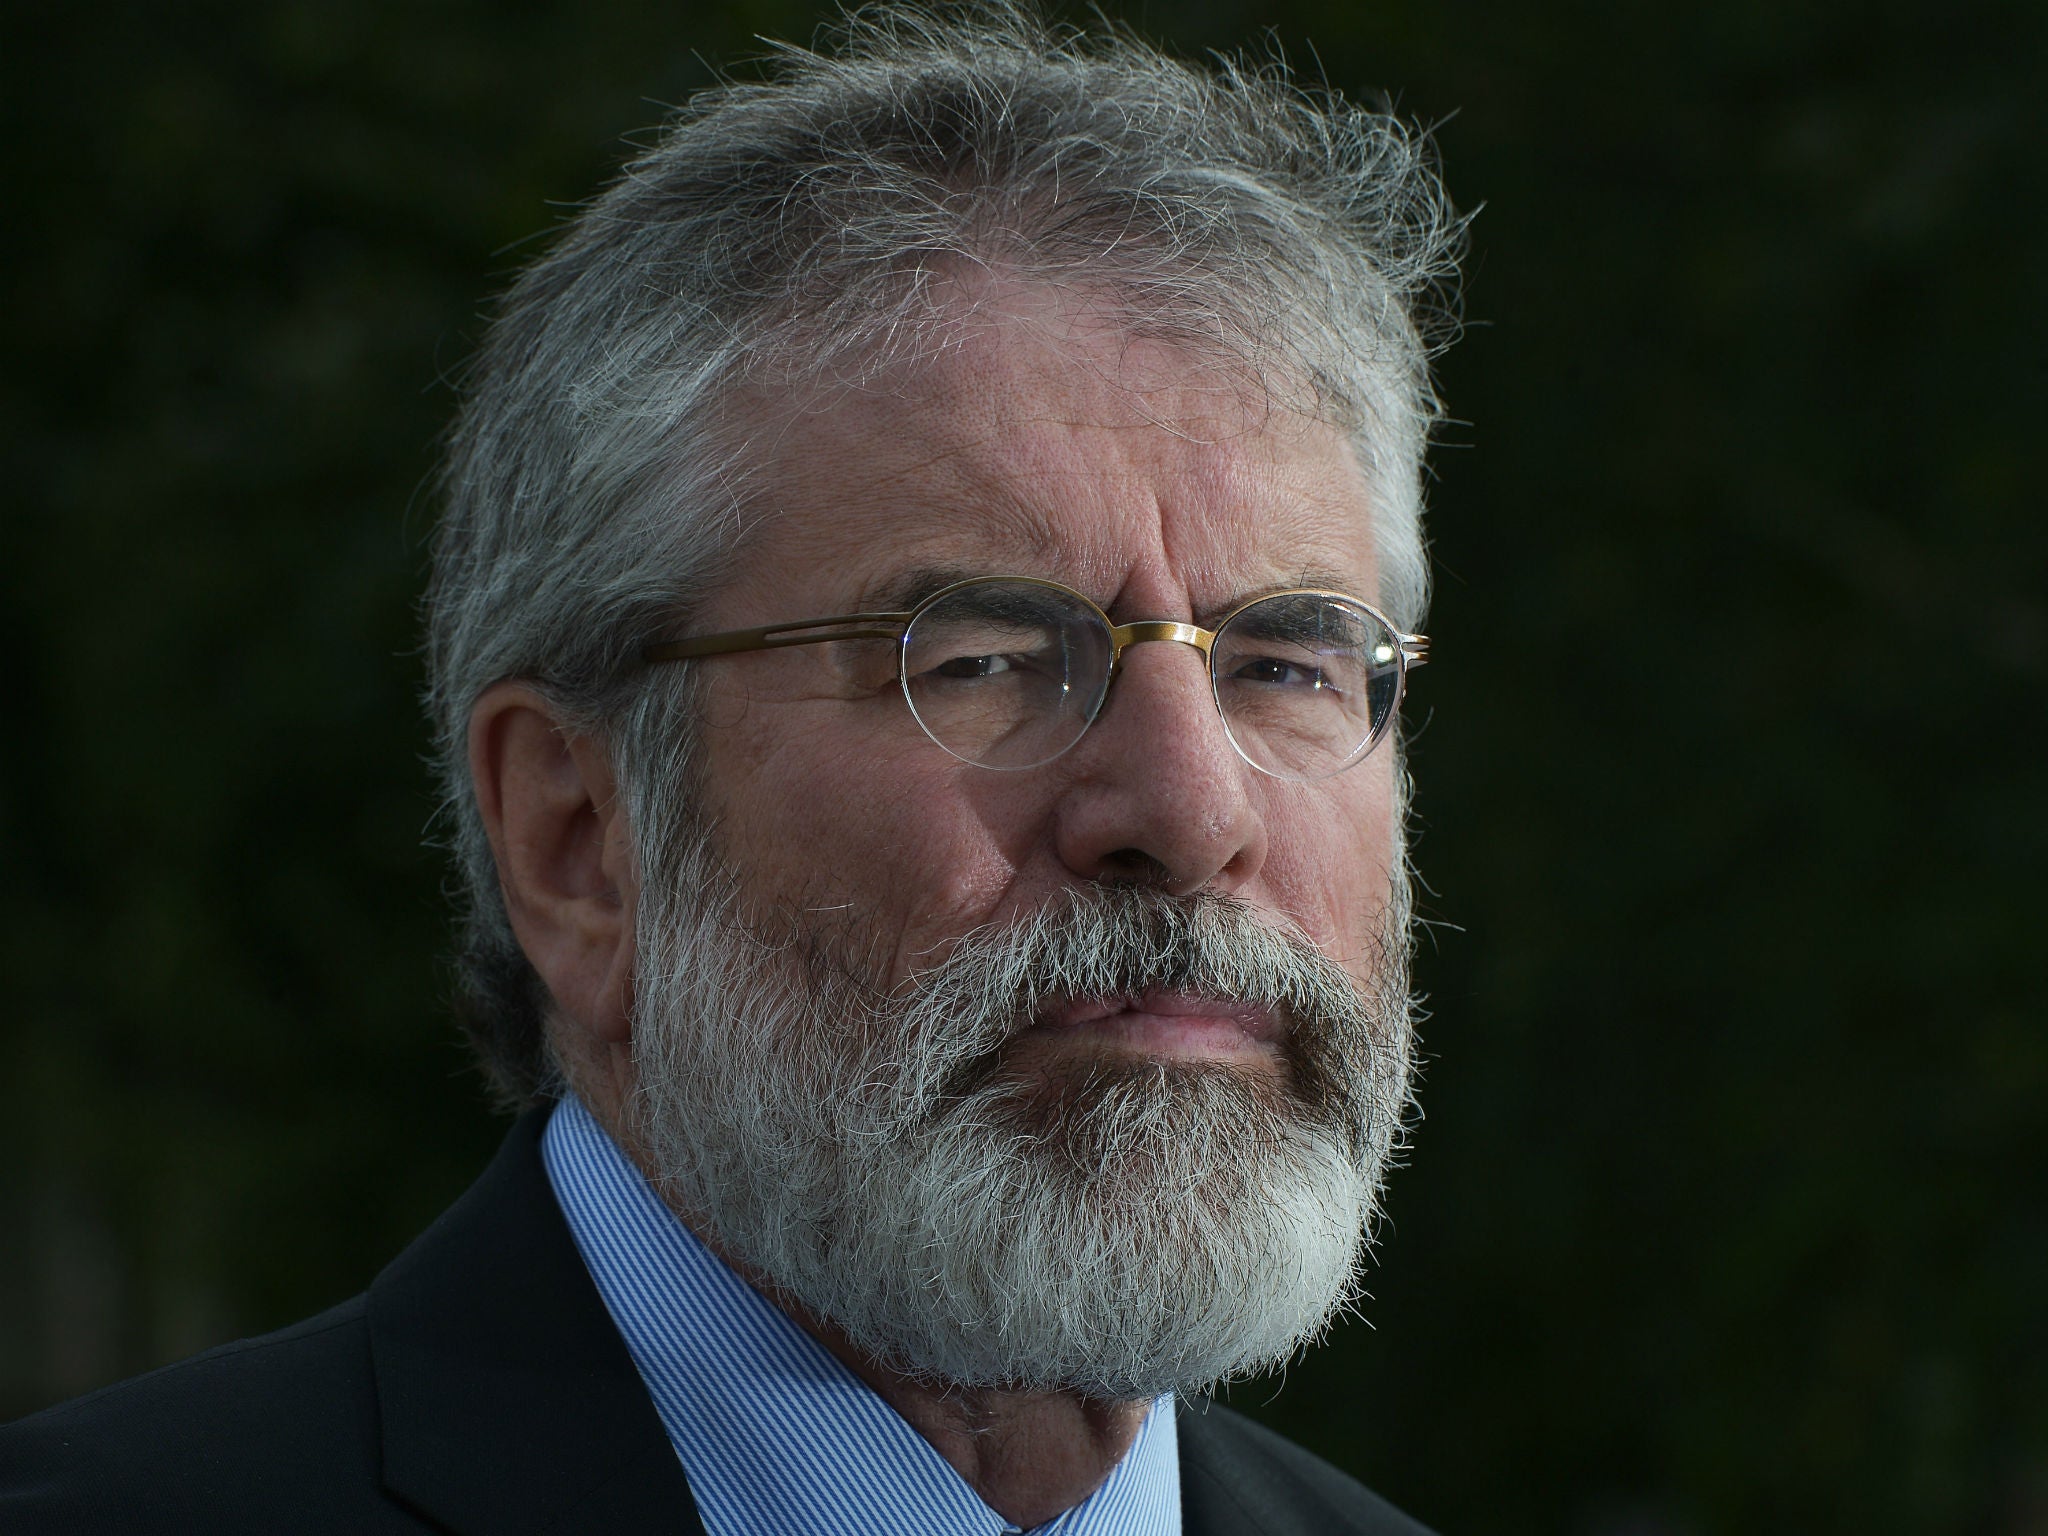 Gerry Adams said his use of the word was ironic